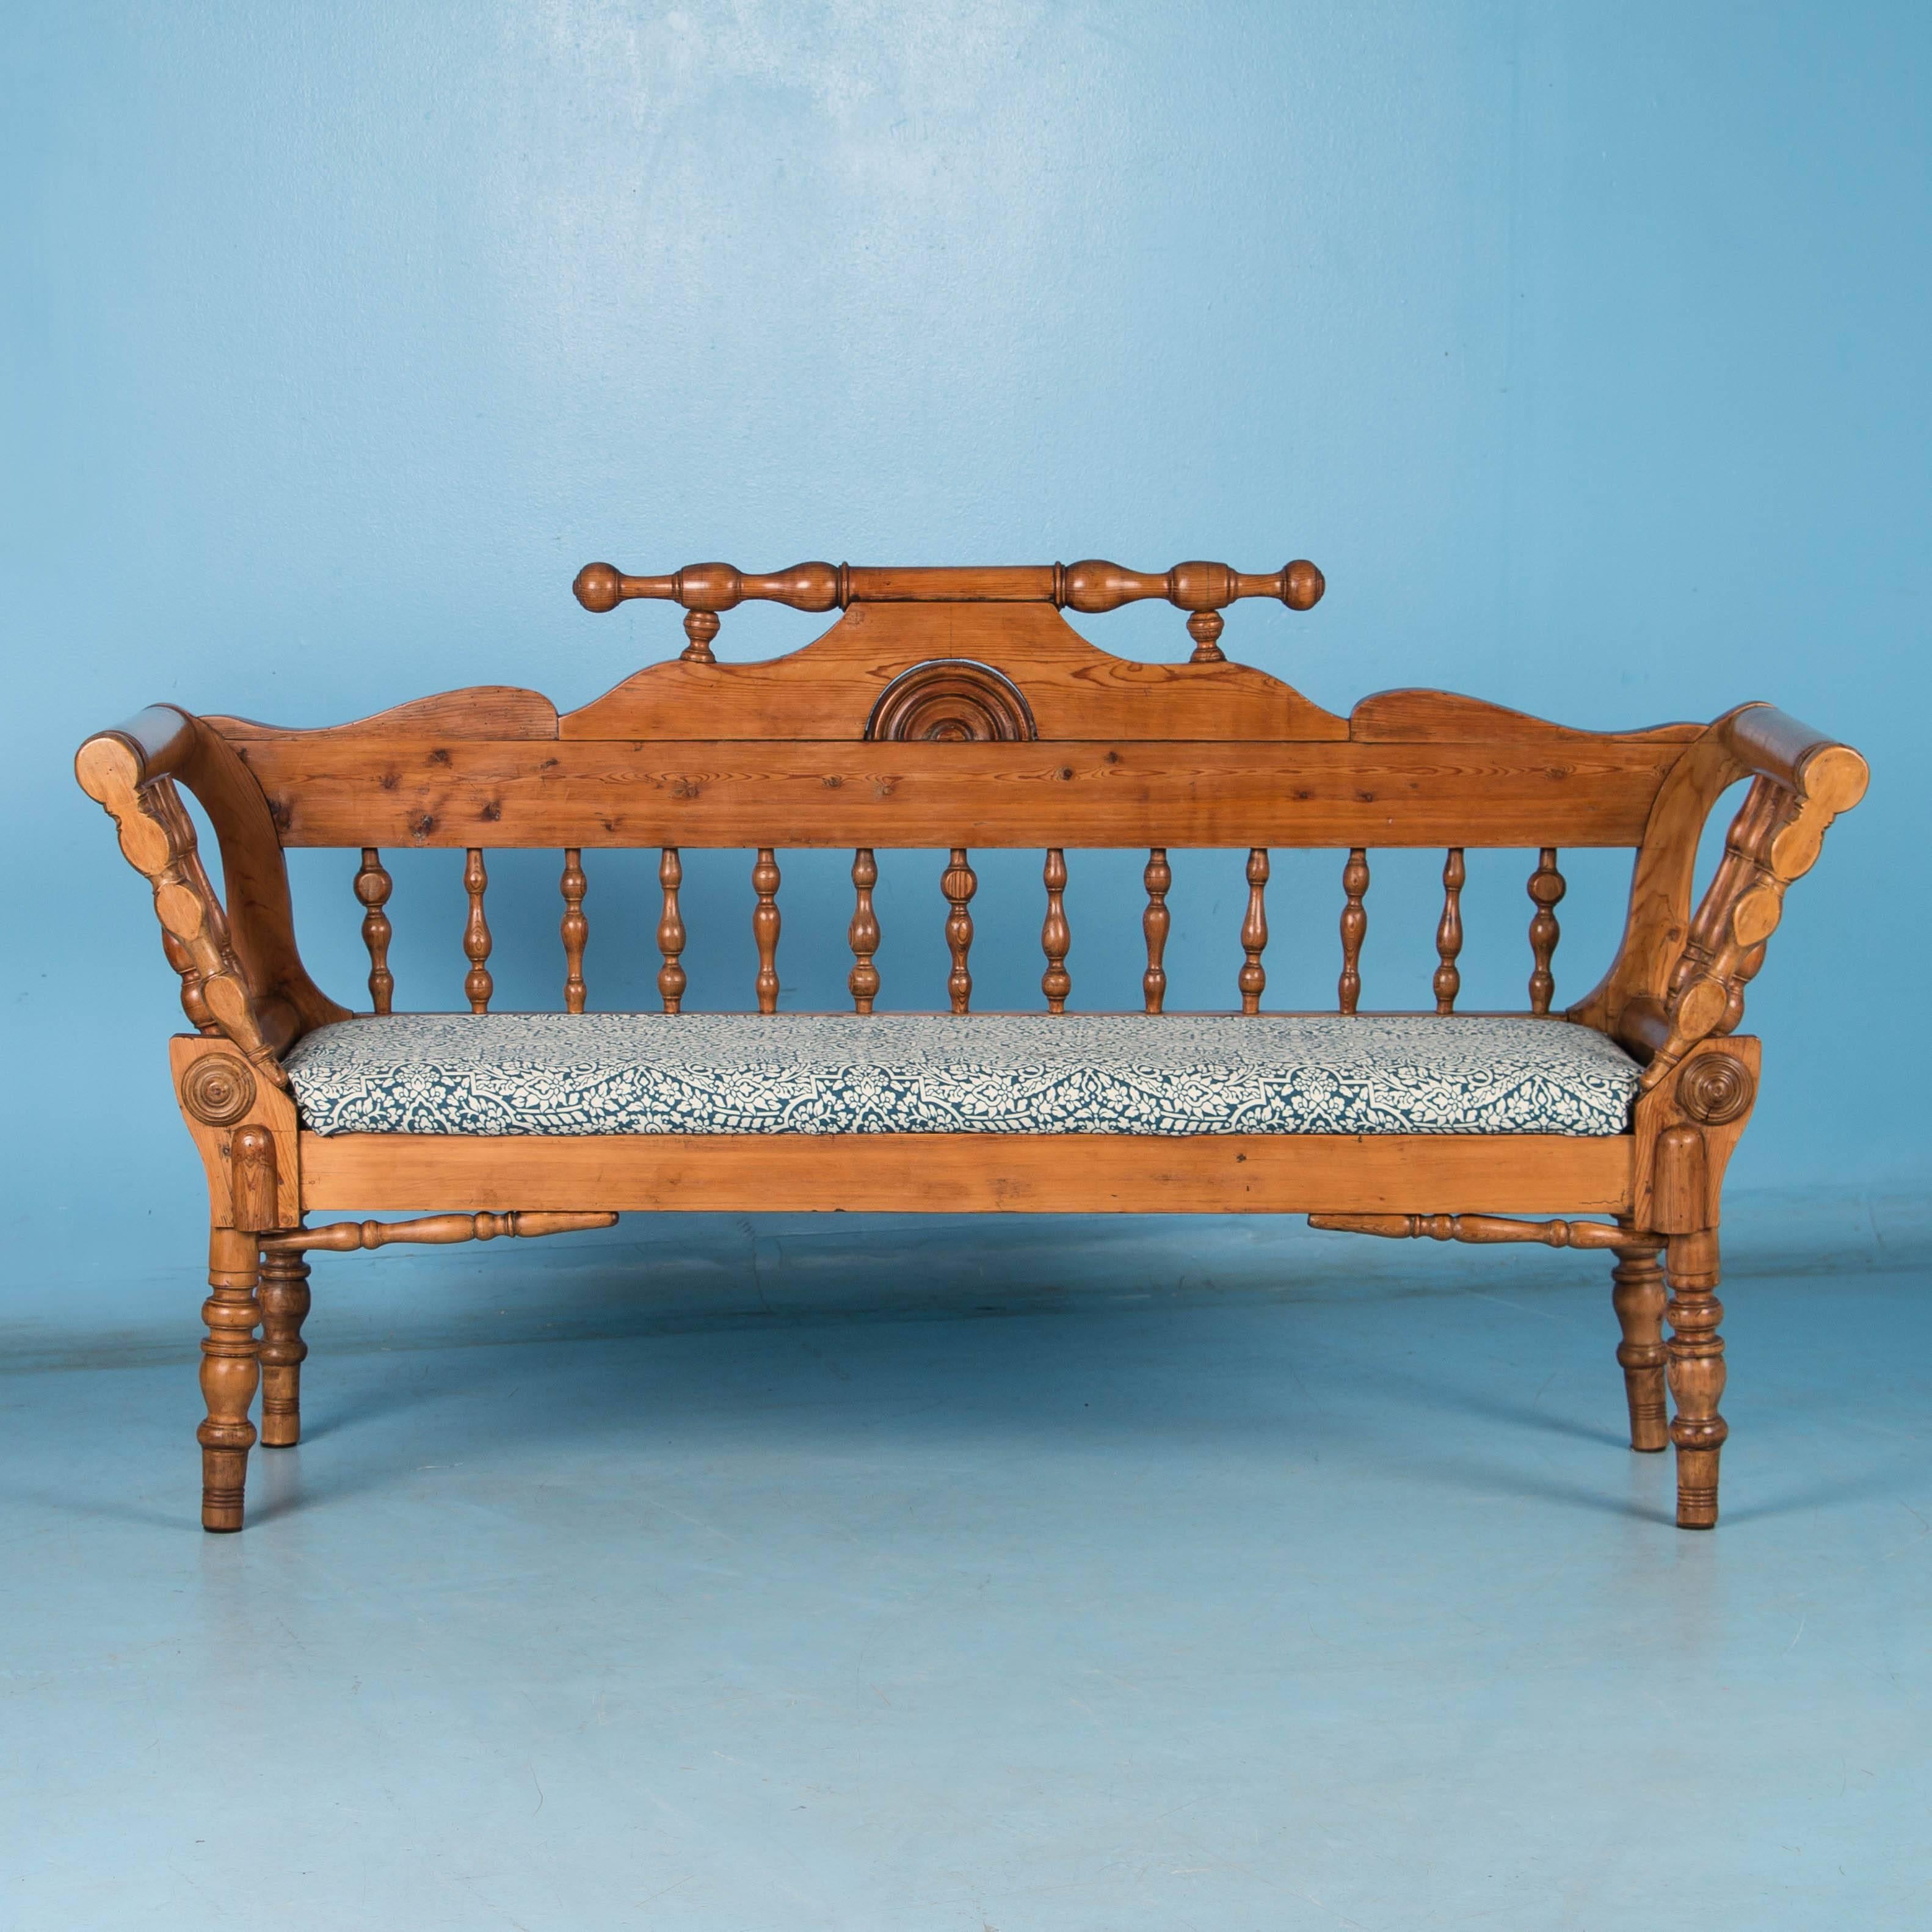 The pine glows on this unusual Swedish cottage style bench with all of it's turned spindles and legs. The wax finish enhances the color and patina of the wood and works beautifully with the country look. The upholstered seat is removable which makes